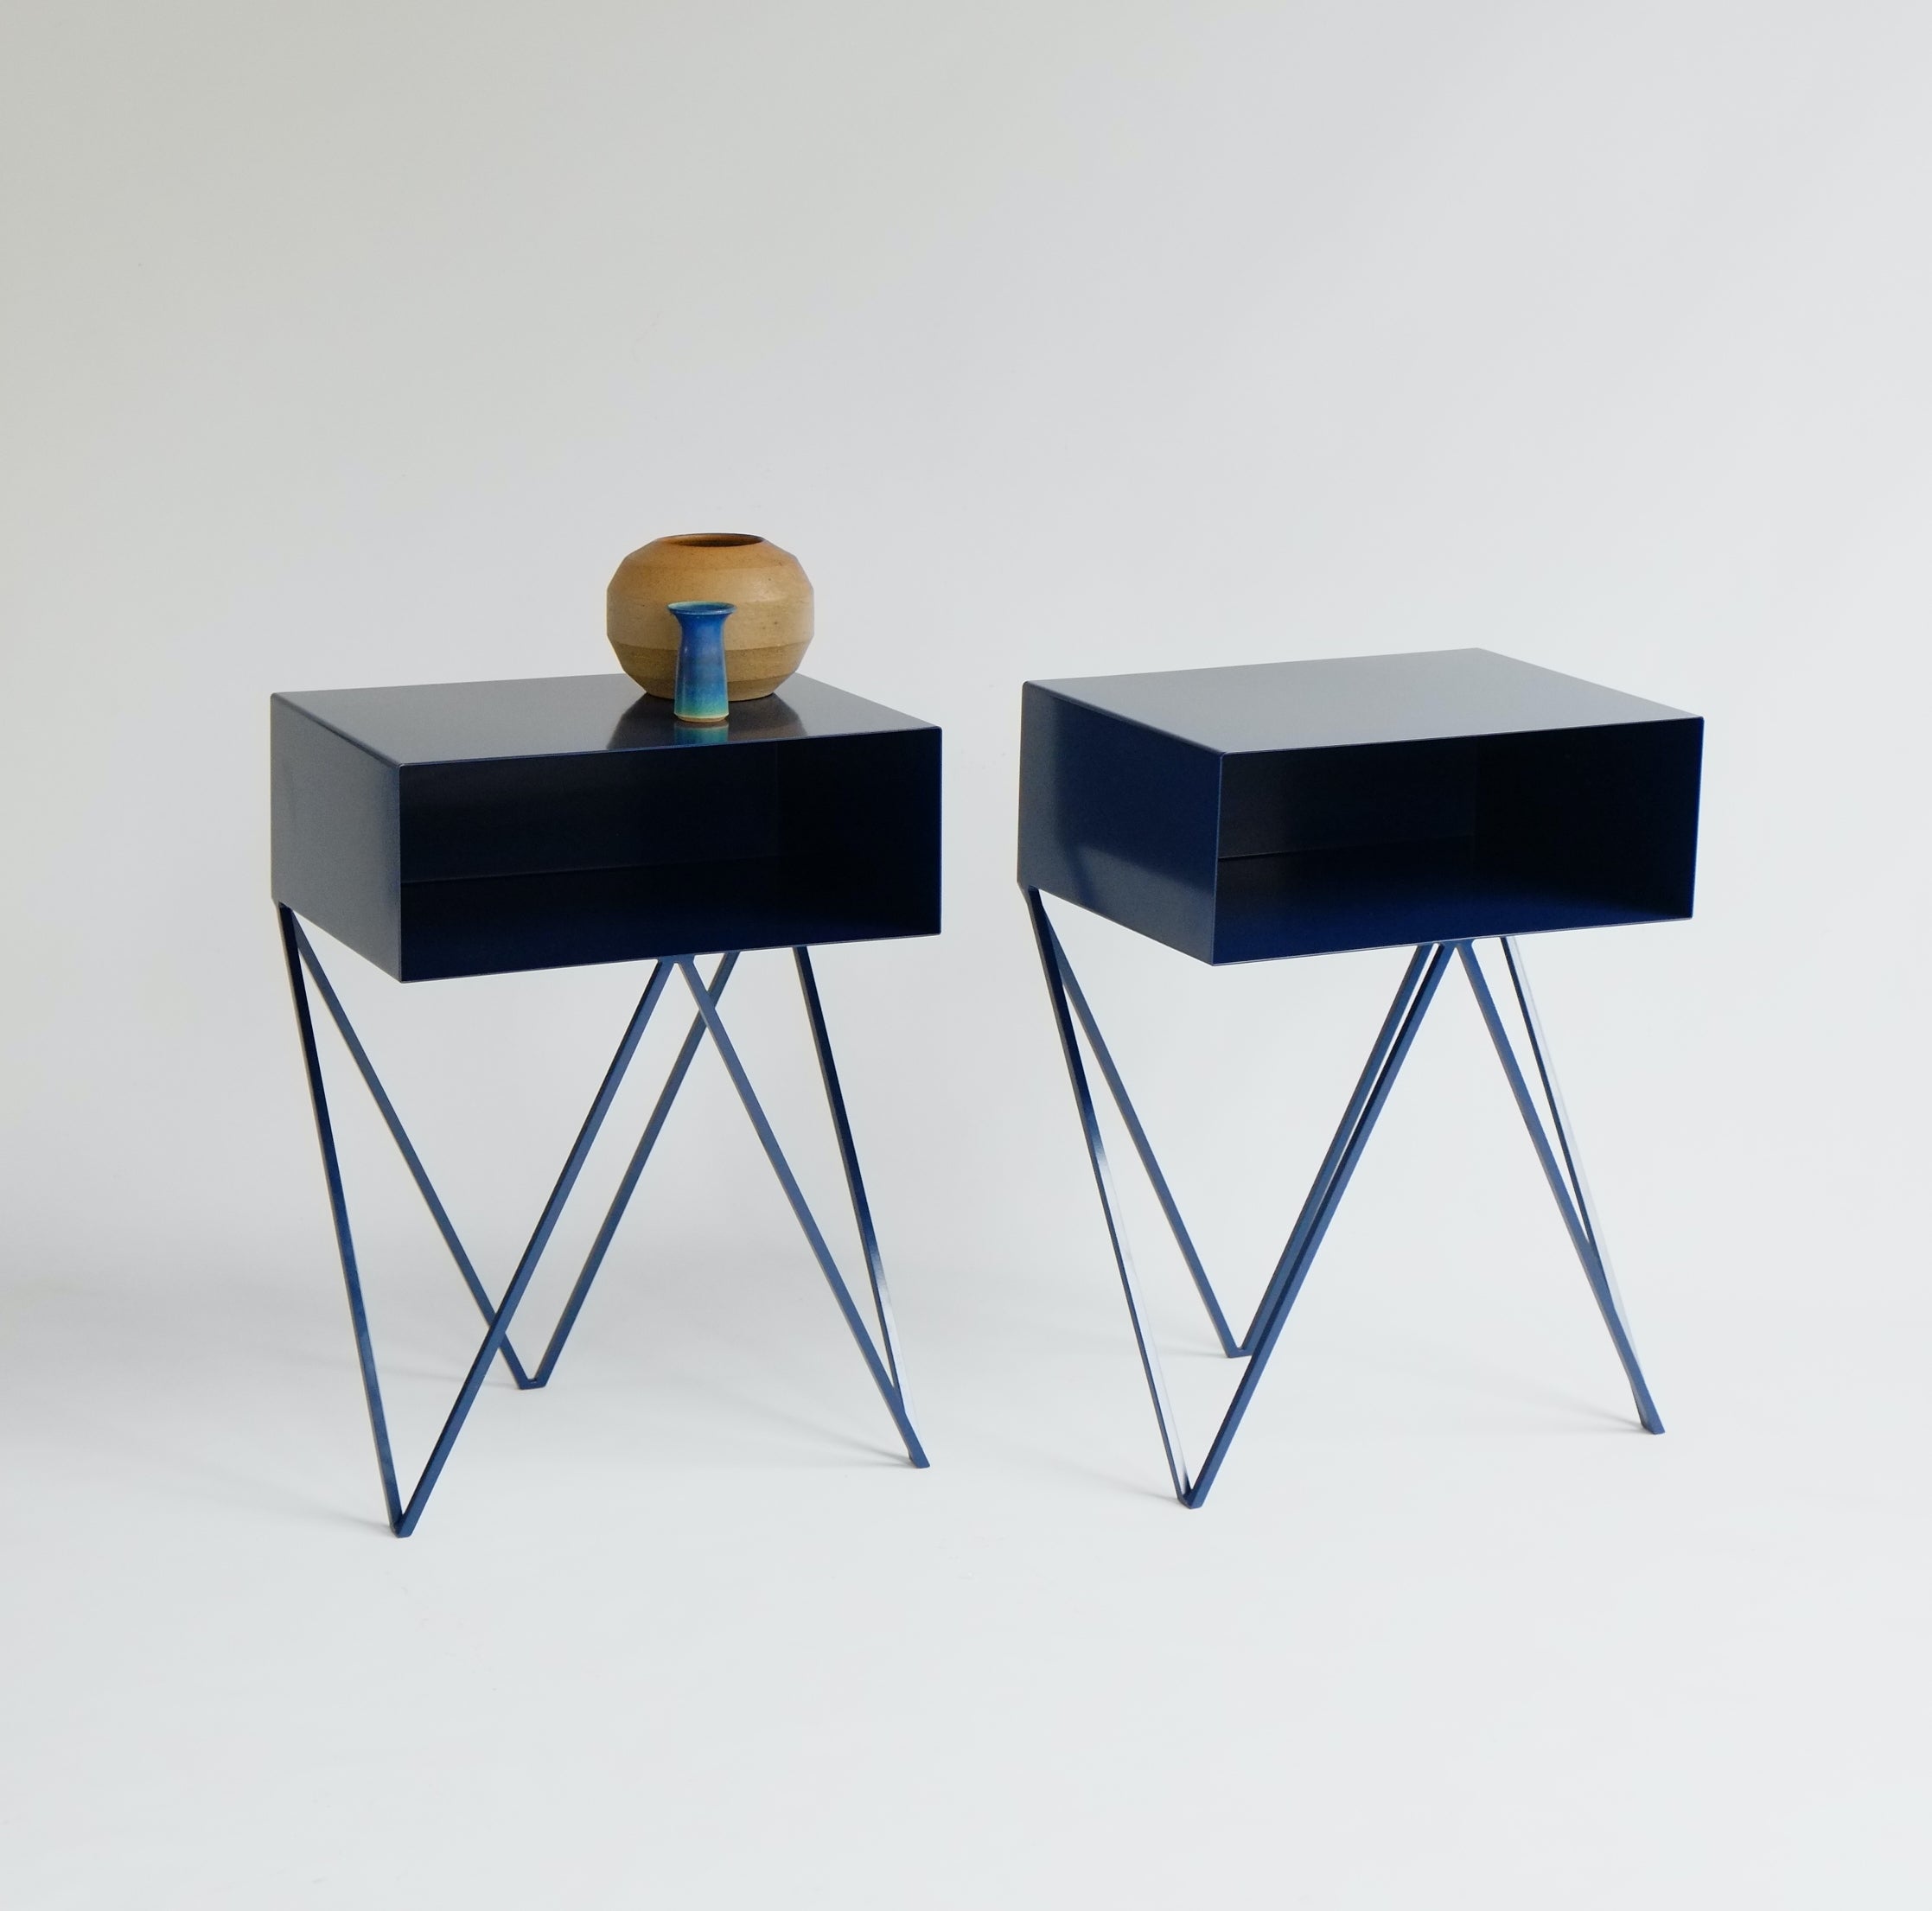 A pair of nightstand tables. 

The Robot side tables feature an open shelf on zig zag legs. A fun and functional design made of solid steel, powder-coated in dark blue. The clean lines look great against period details as well as in modern spaces.